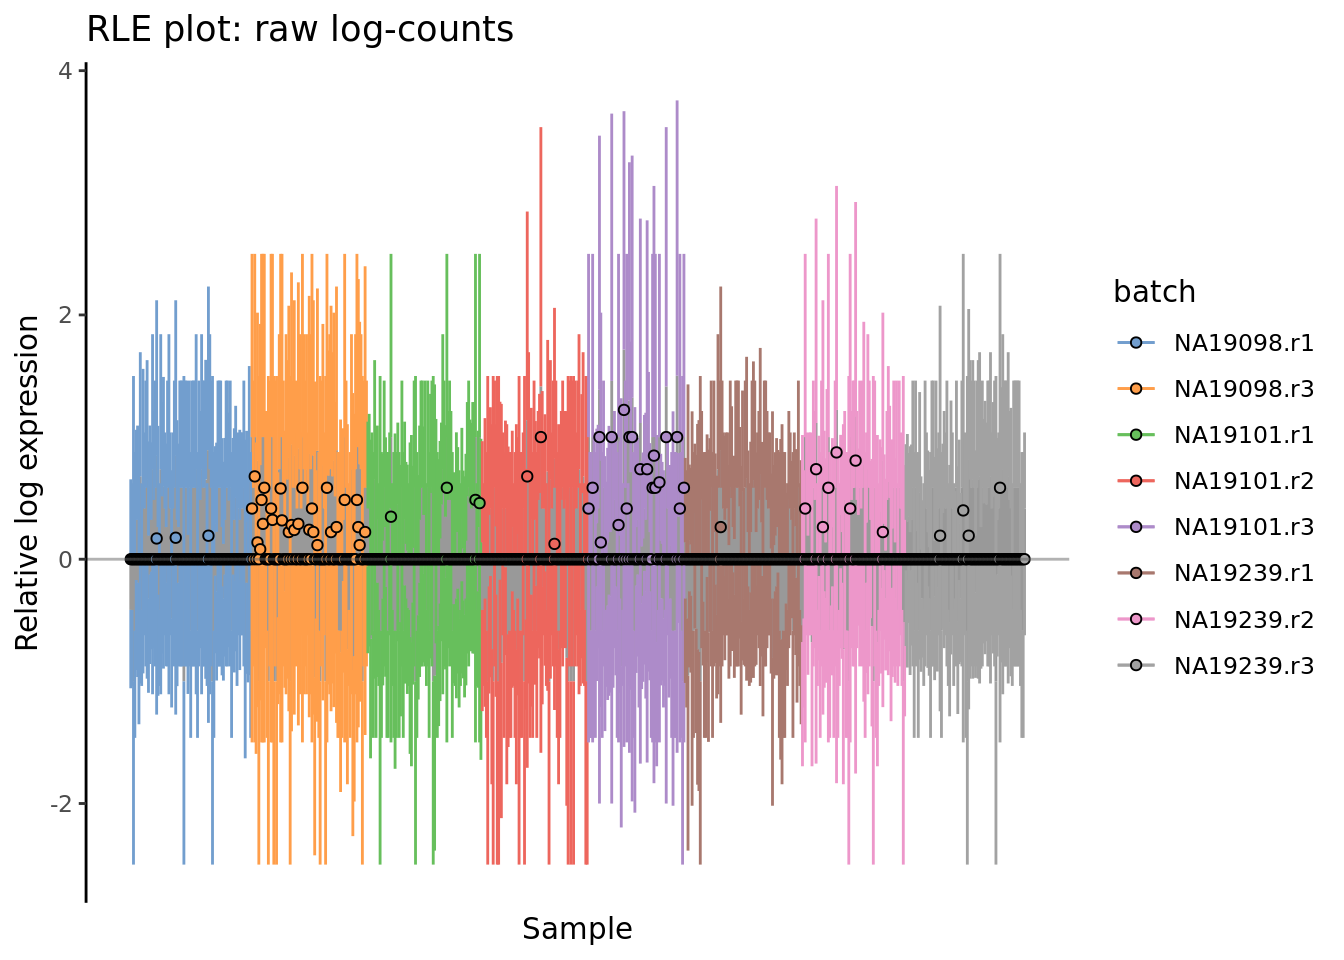 Cell-wise RLE of the tung data. The relative log expression profile of each cell is represented by a boxplot, which appears as a line here. The grey bar in the middle for each cell represent the interquartile range of the RLE values; the coloured lines represent the whiskers ofof a boxplot and extend above and below the grey bar by 1.5 times the interquartile range. The median RLE value is shown with a circle.